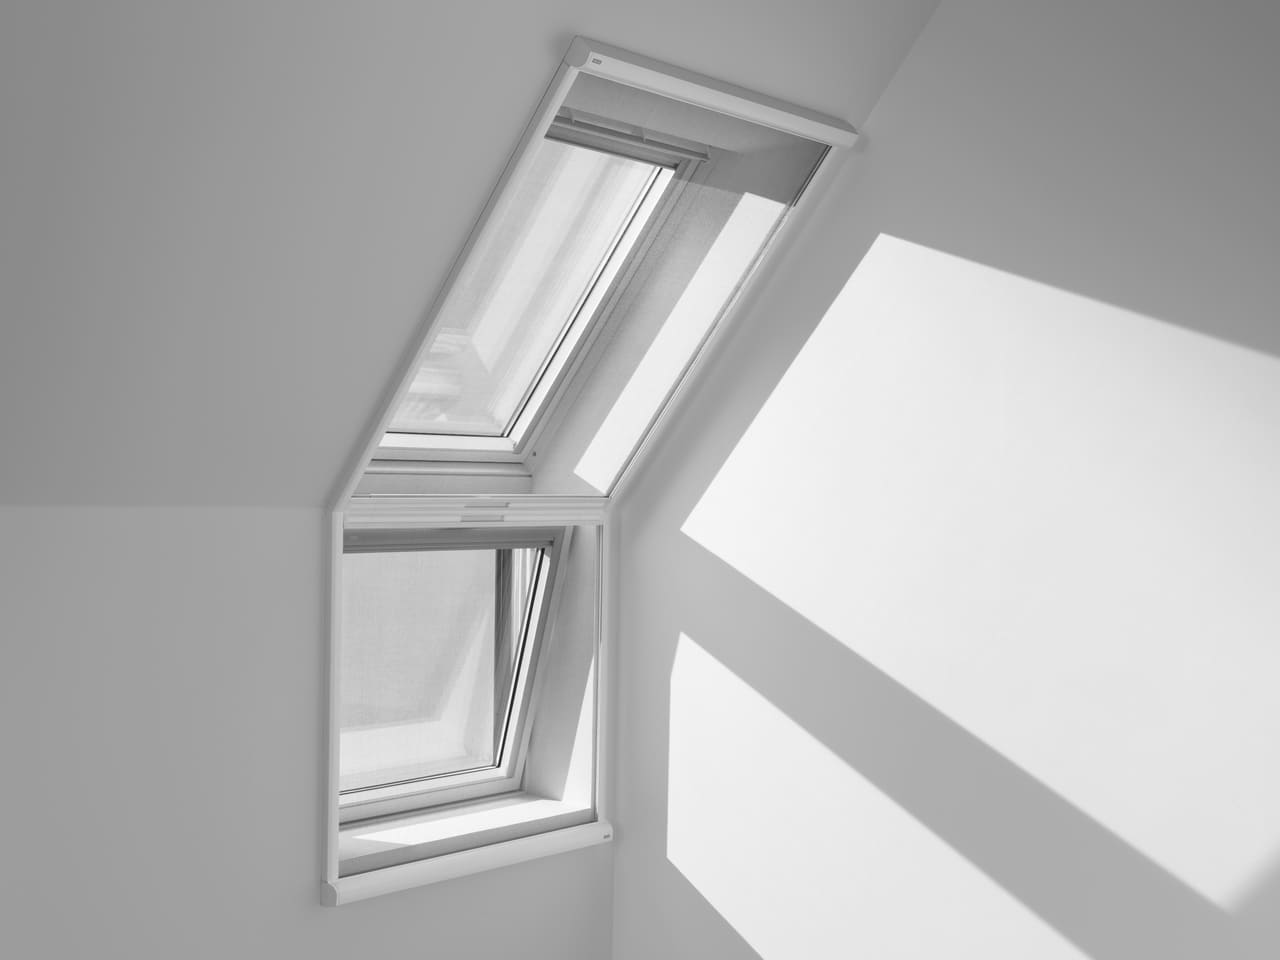 Image of VELUX roof window and extension with insect-screen to keep out bugs.